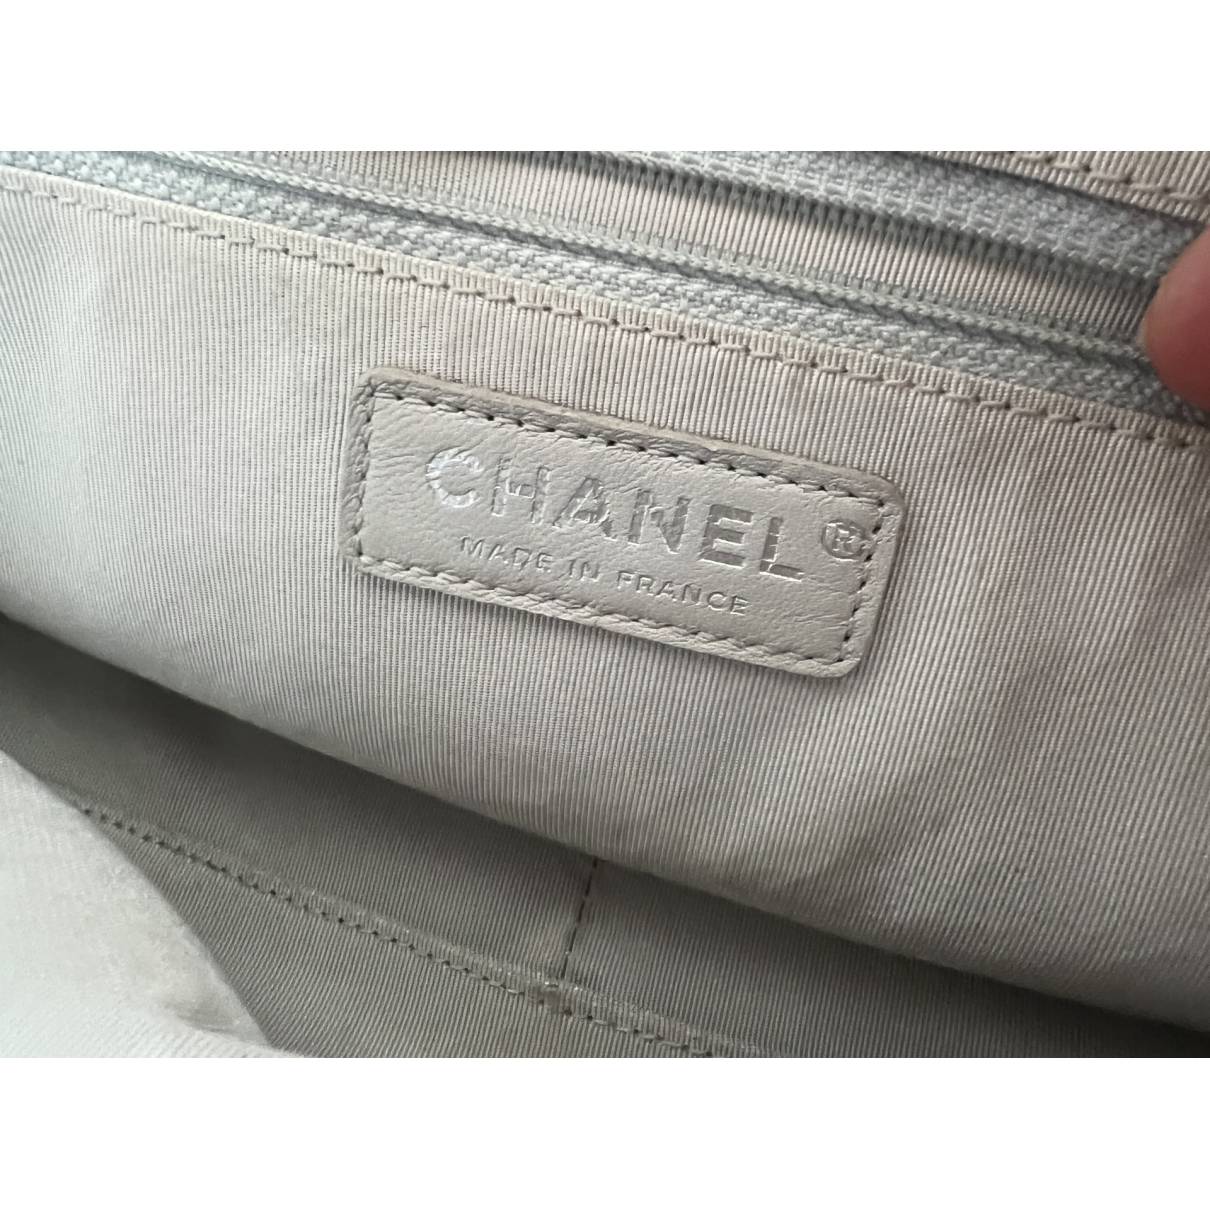 Chanel Airline 2016 Silver Quilted Leather Easy Flap Shoulder Bag